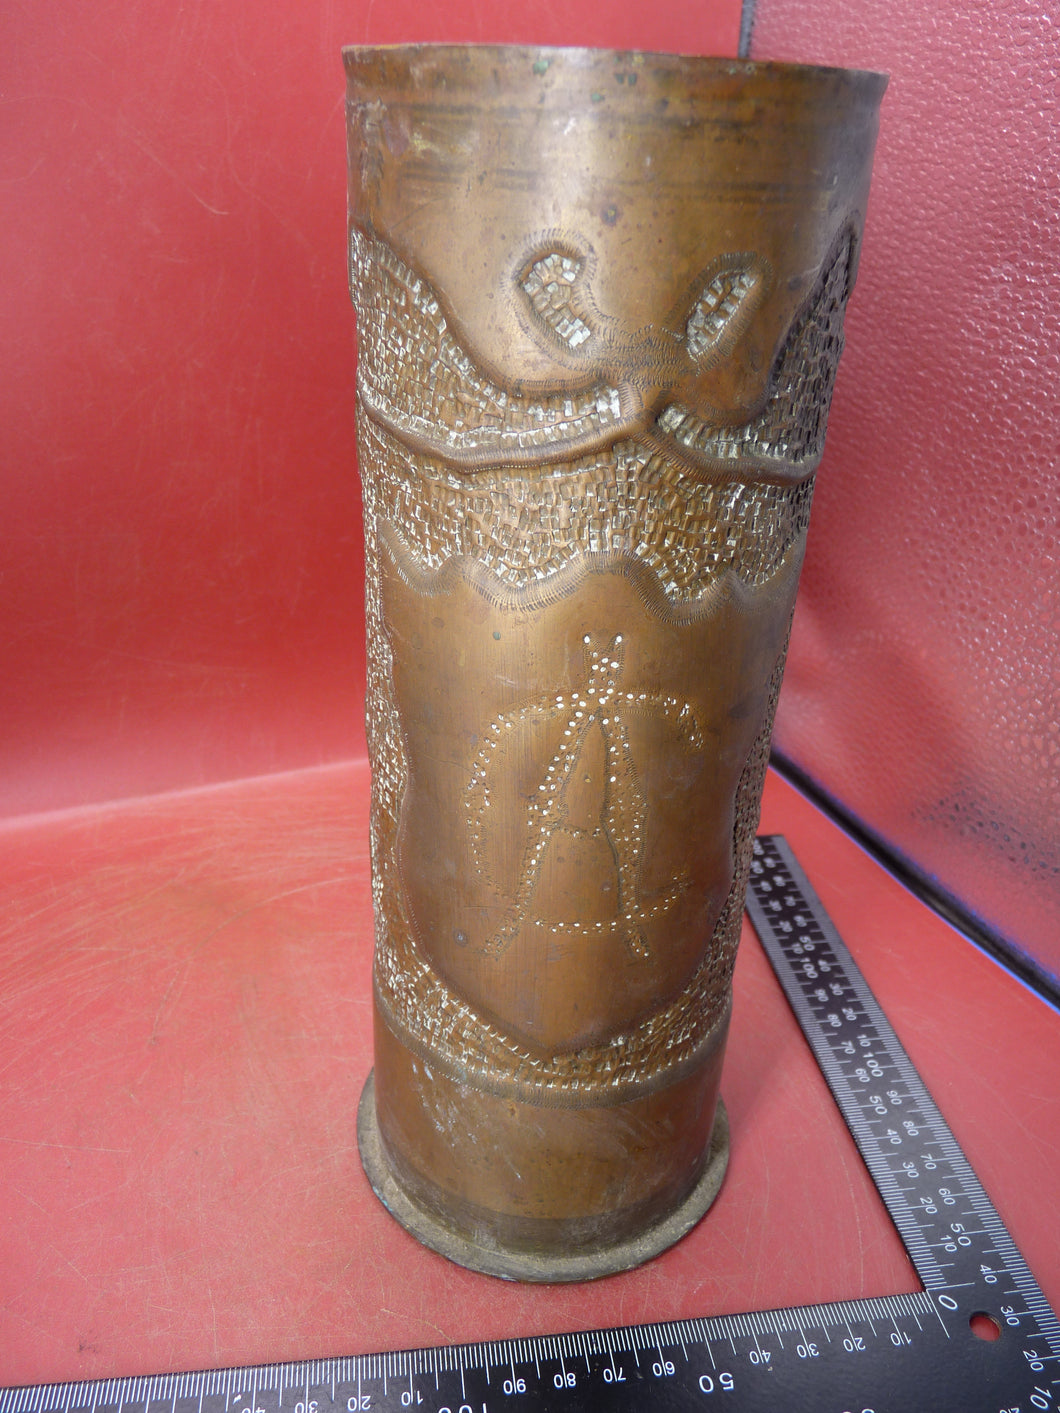 Original WW1 Trench Art Shell Case Vase with Initials